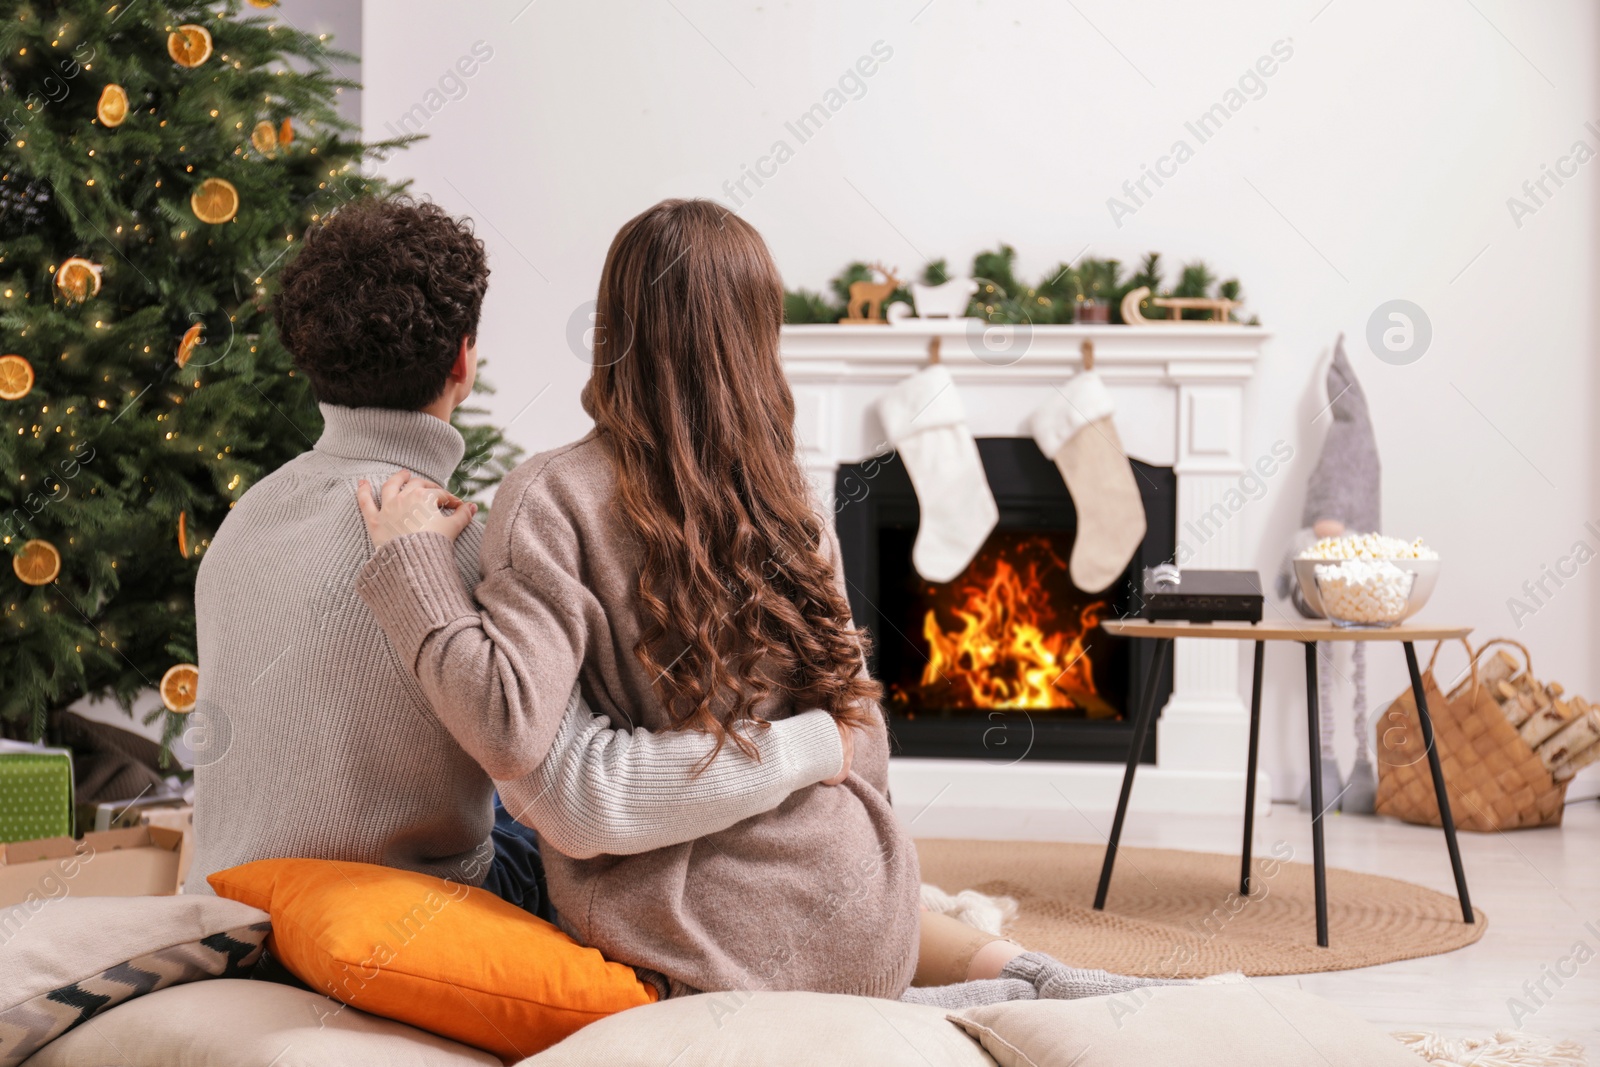 Photo of Couple watching movie via video projector at home, back view